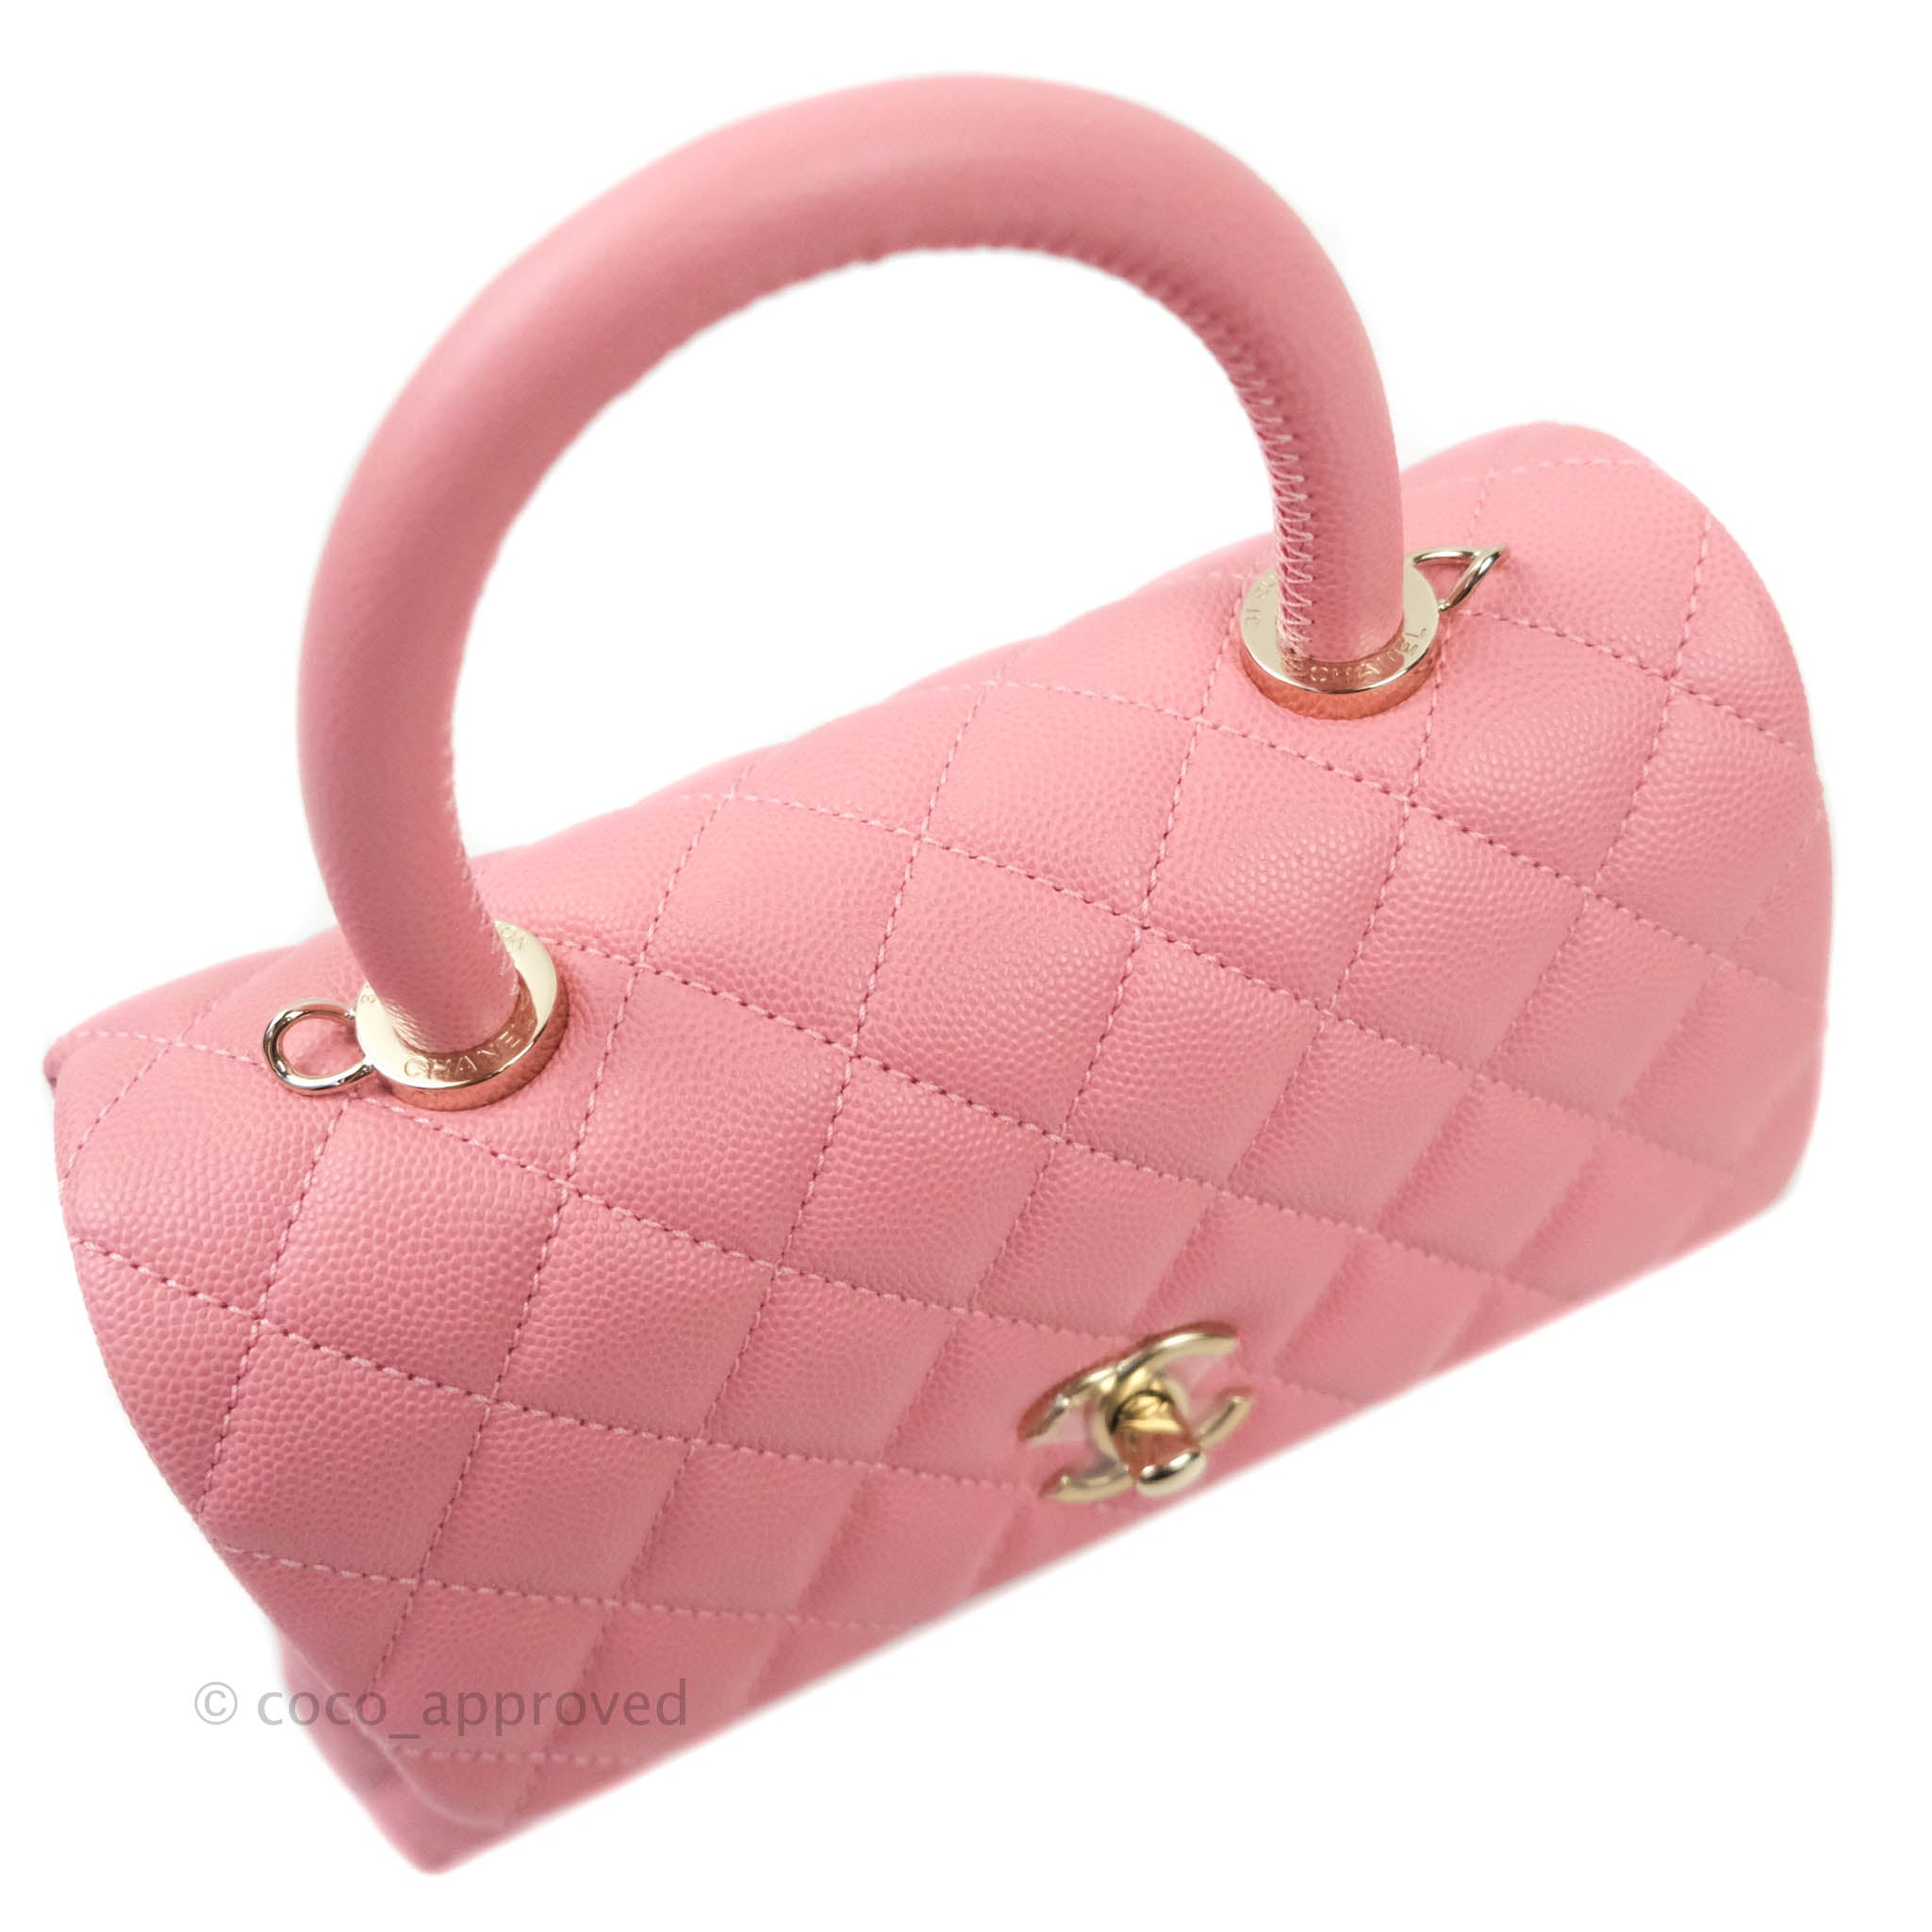 coco chanel bag pink